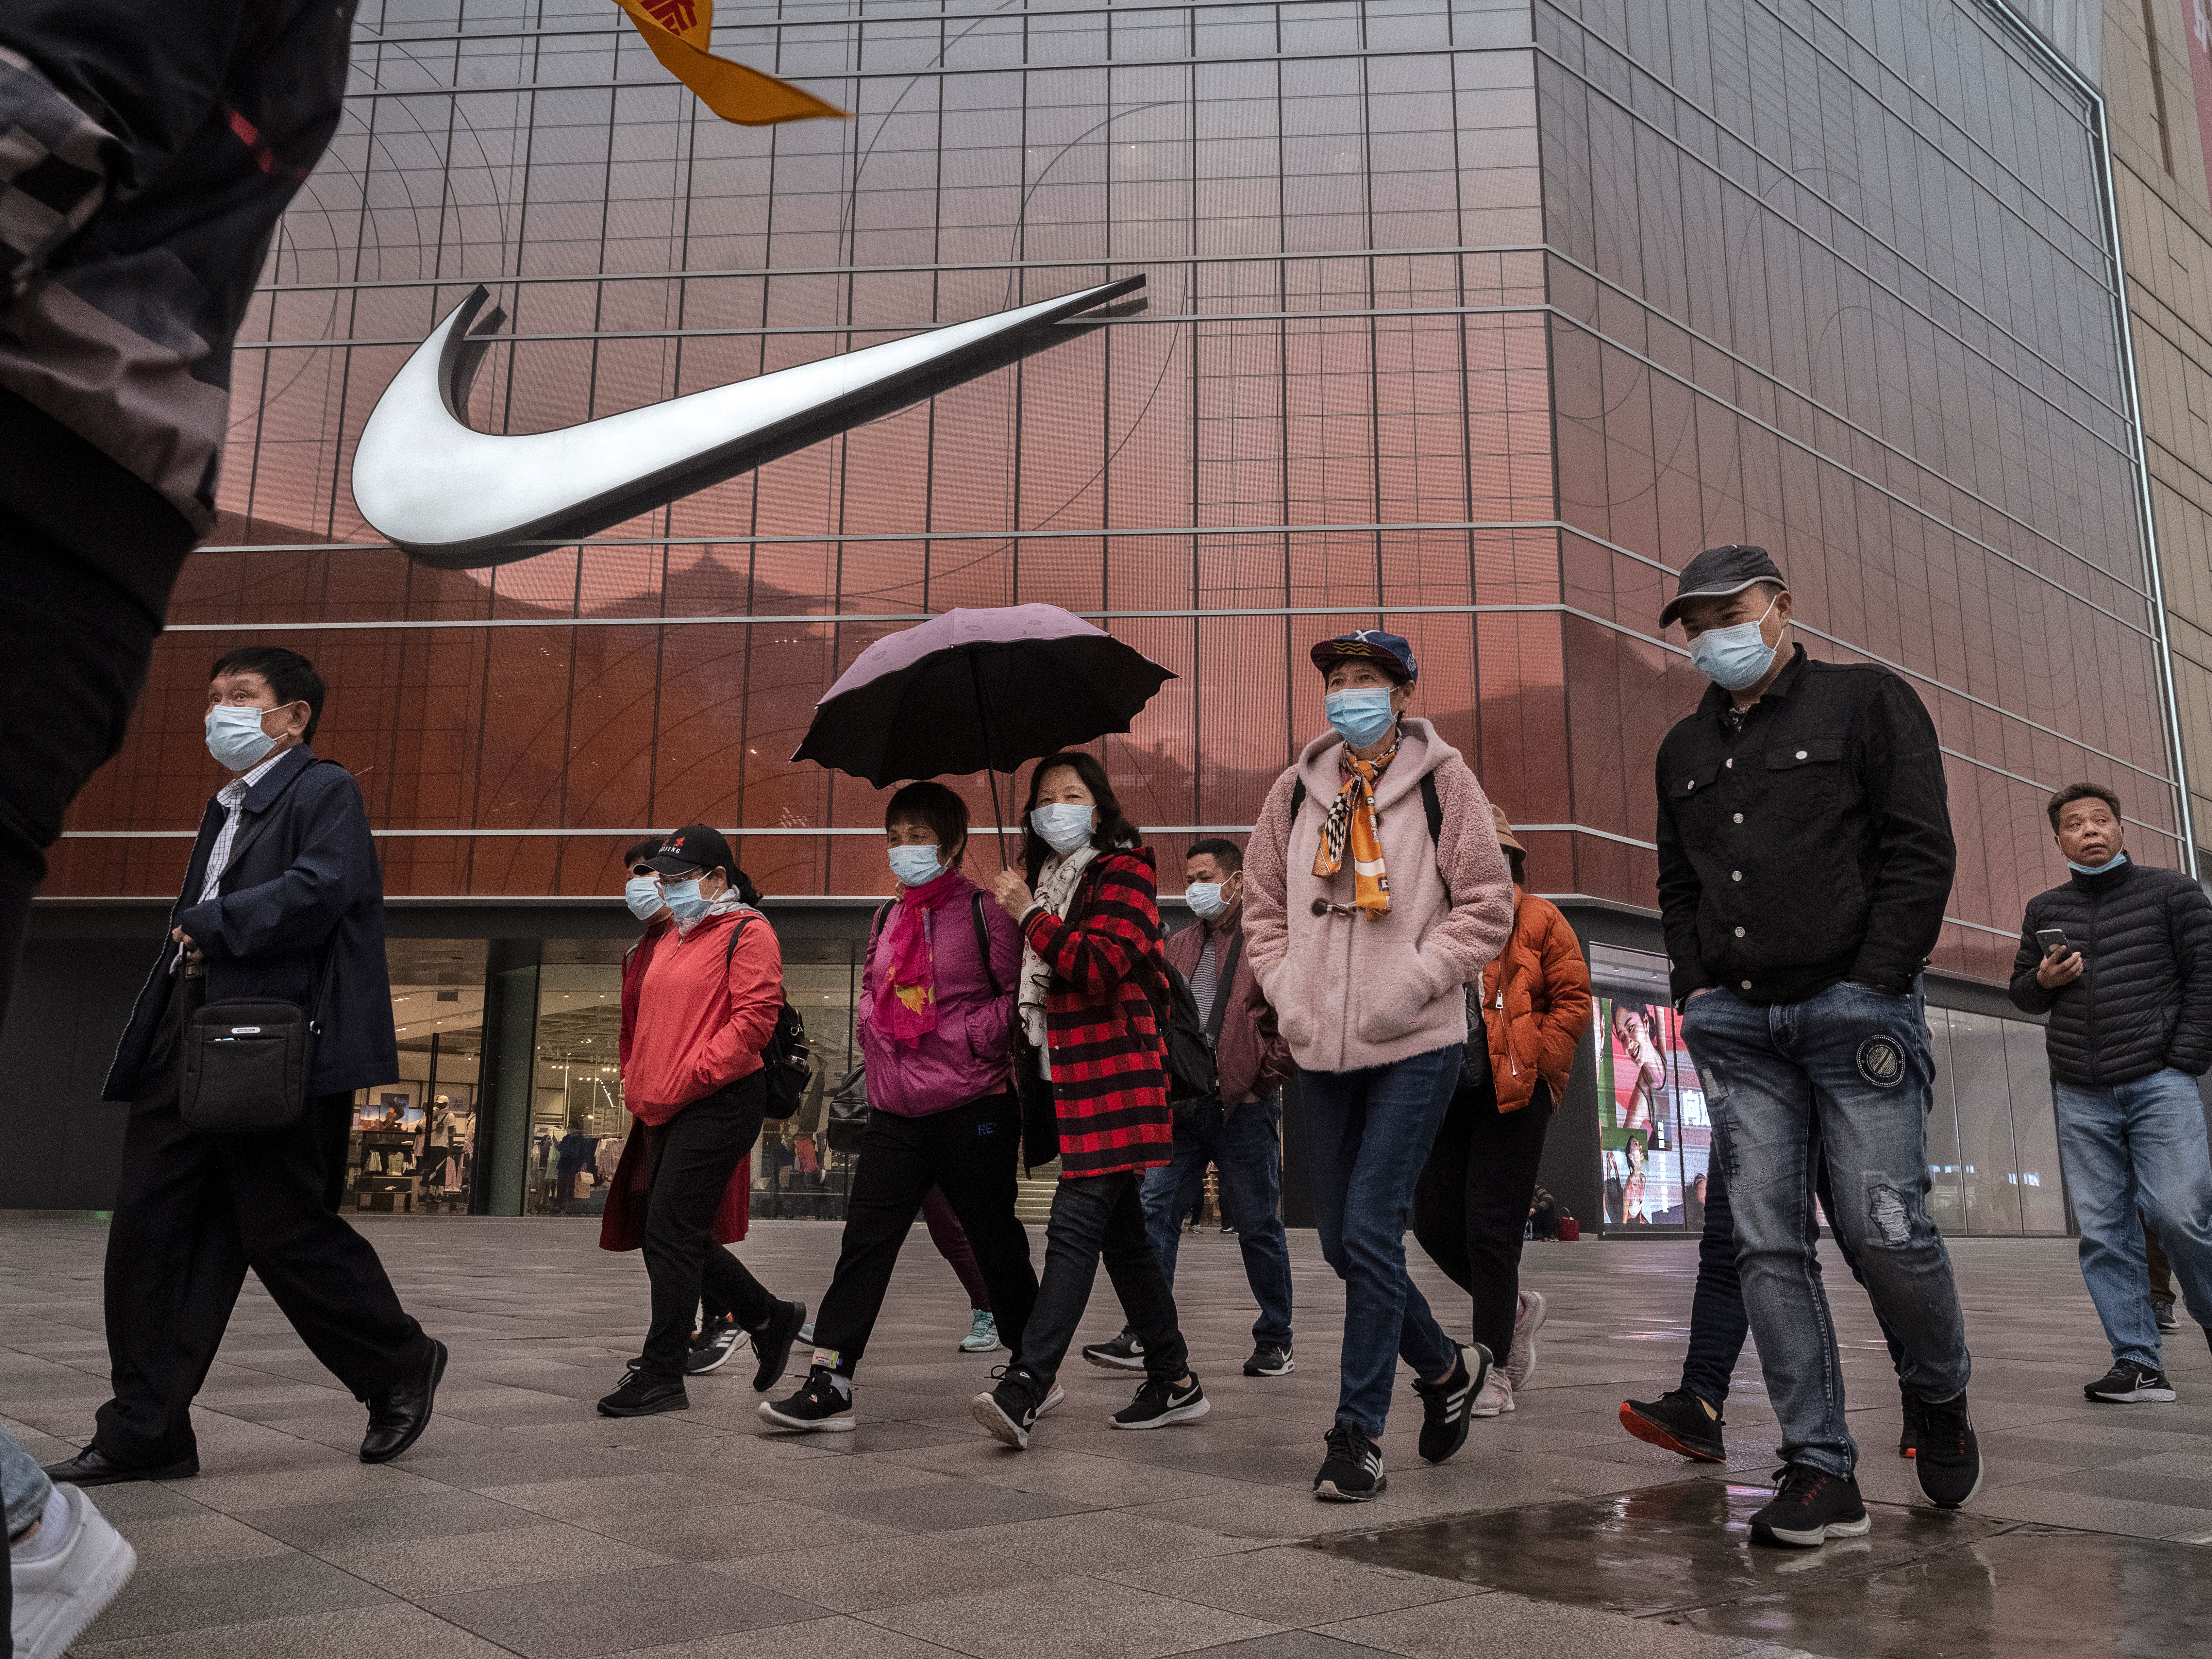 el último Etna Si Nike: 45x Earnings For Shoes And Social Justice (NYSE:NKE) | Seeking Alpha